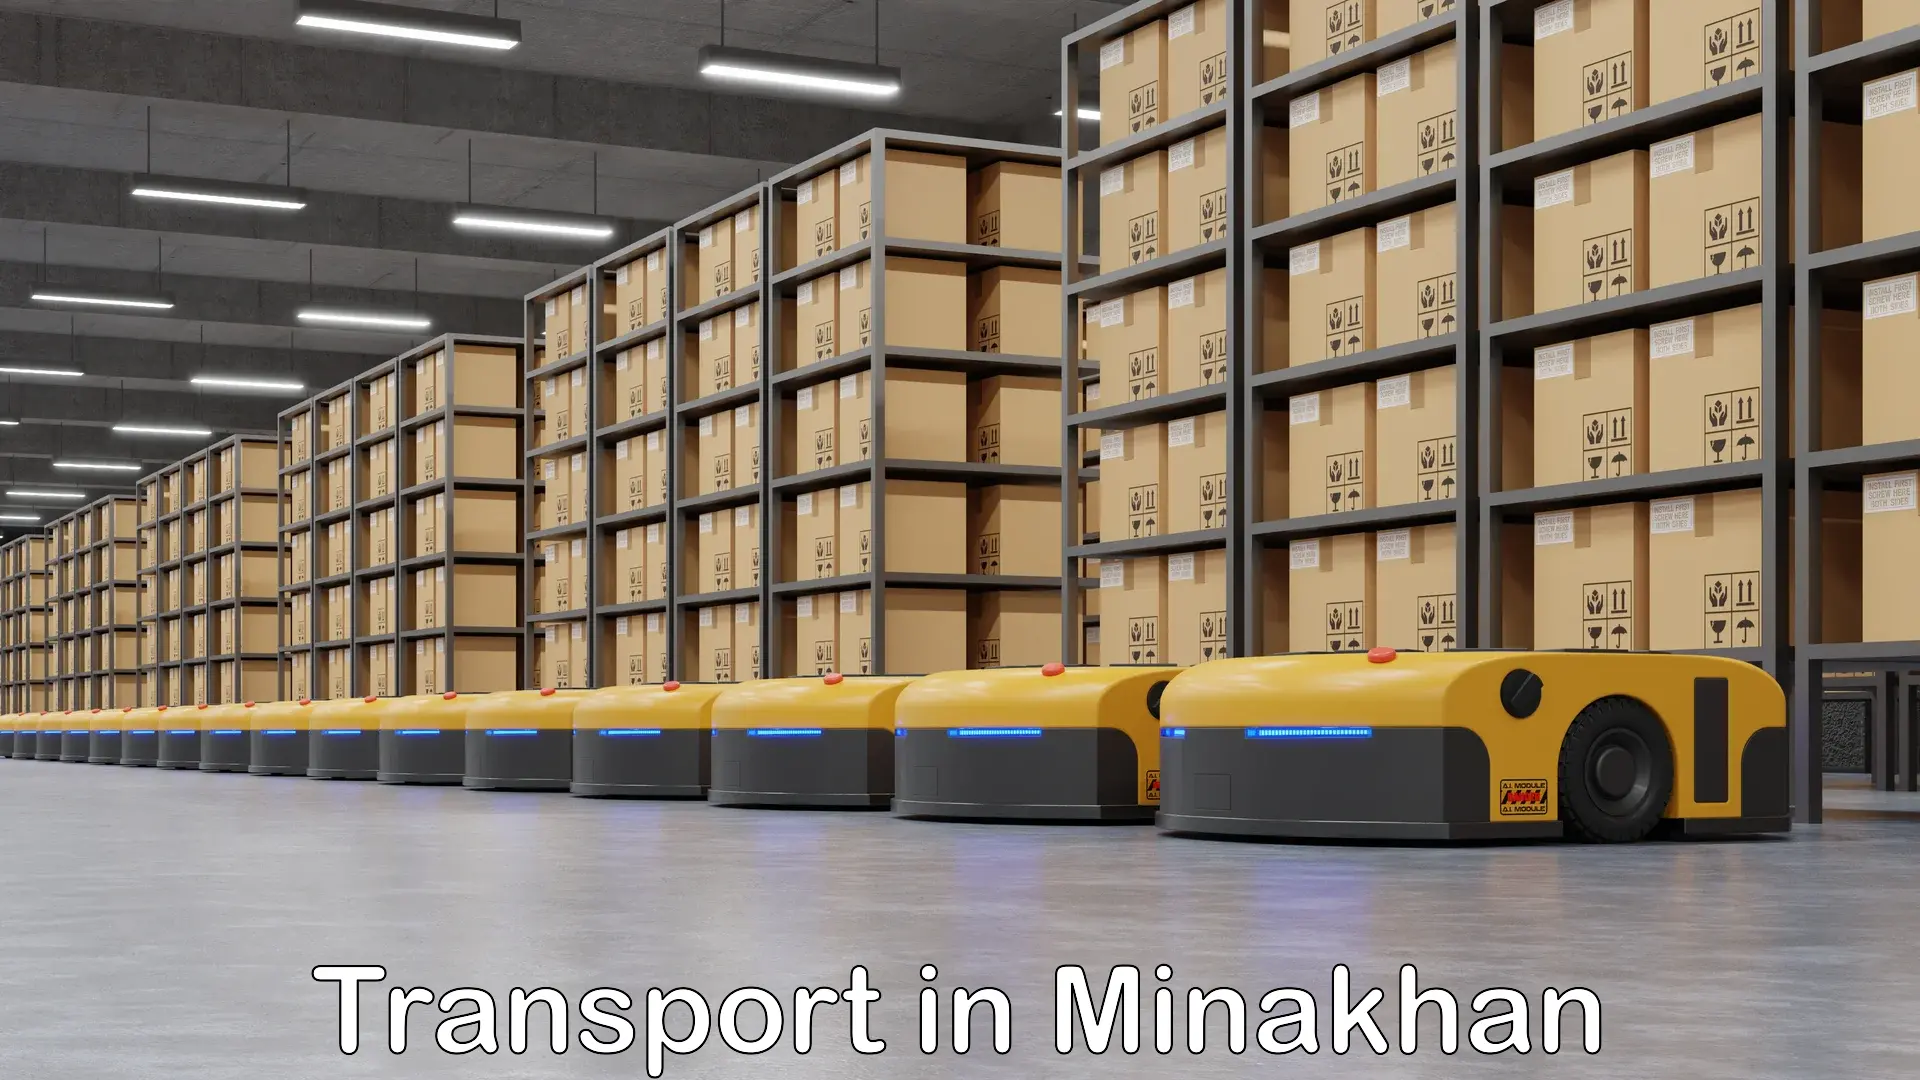 Container transportation services in Minakhan